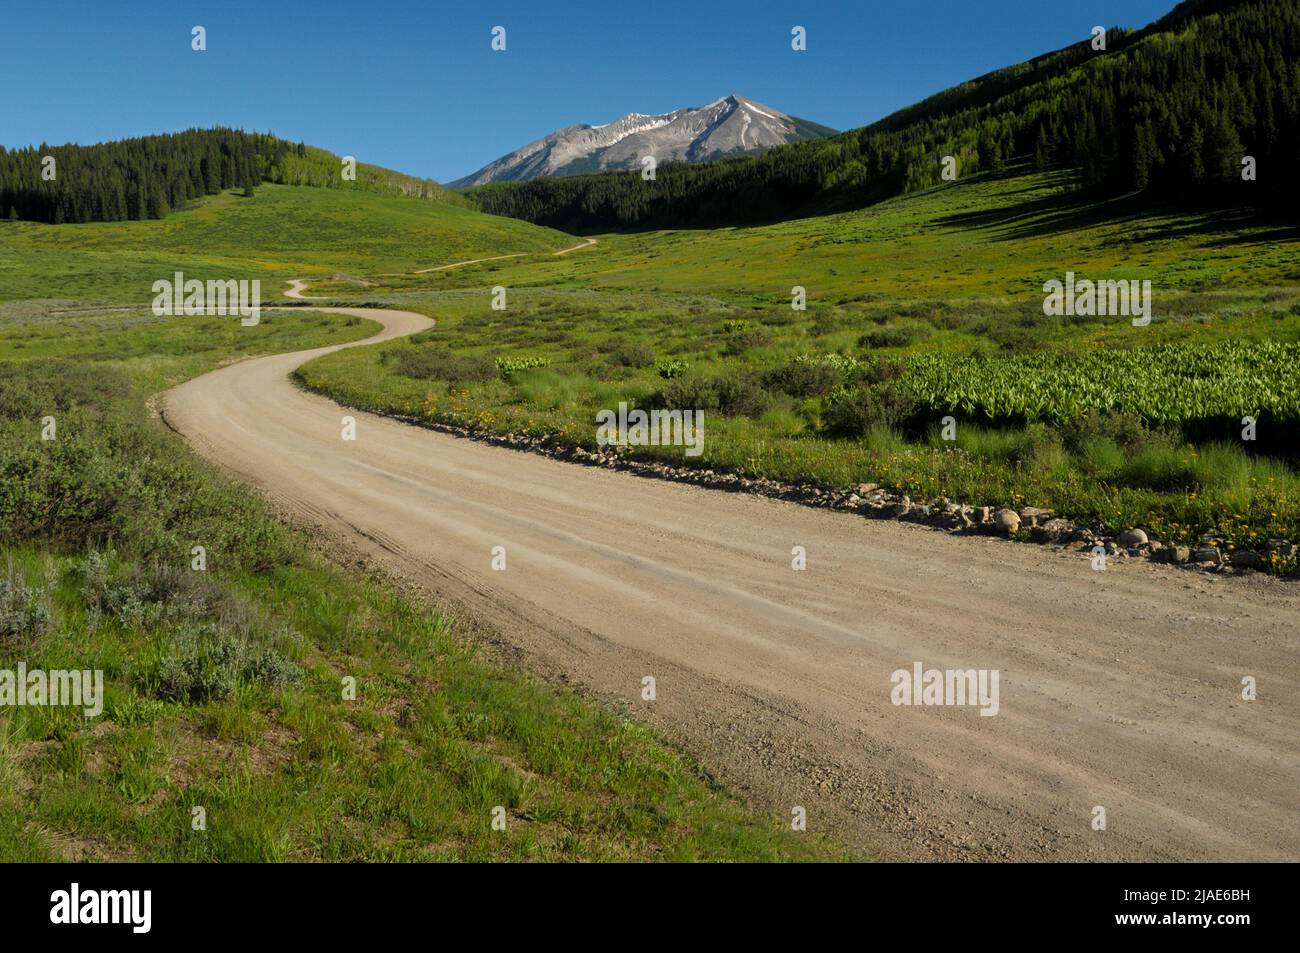 Dirt road Gunnison National Forest, Colorado, USA Stock Photo